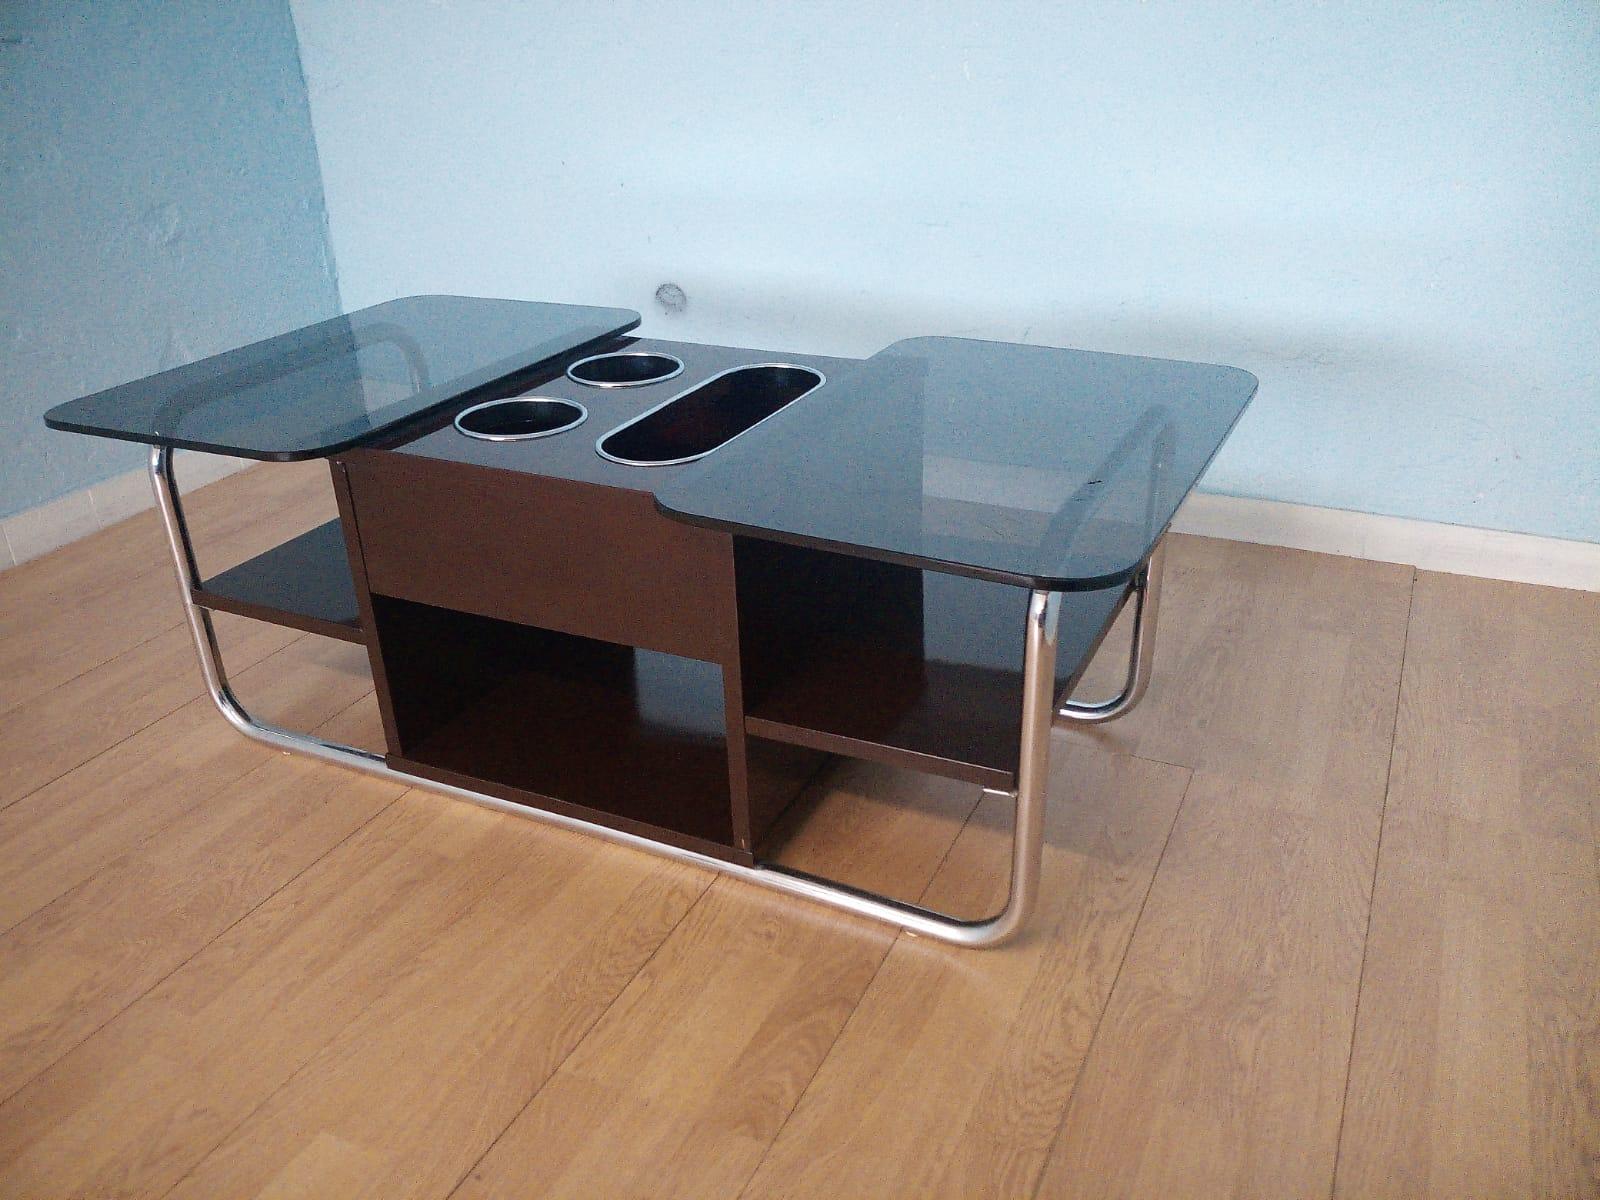 Chrome & Smoked Glass Coffee Table, 1970s Bar Table Design Vintage Industrial For Sale 9